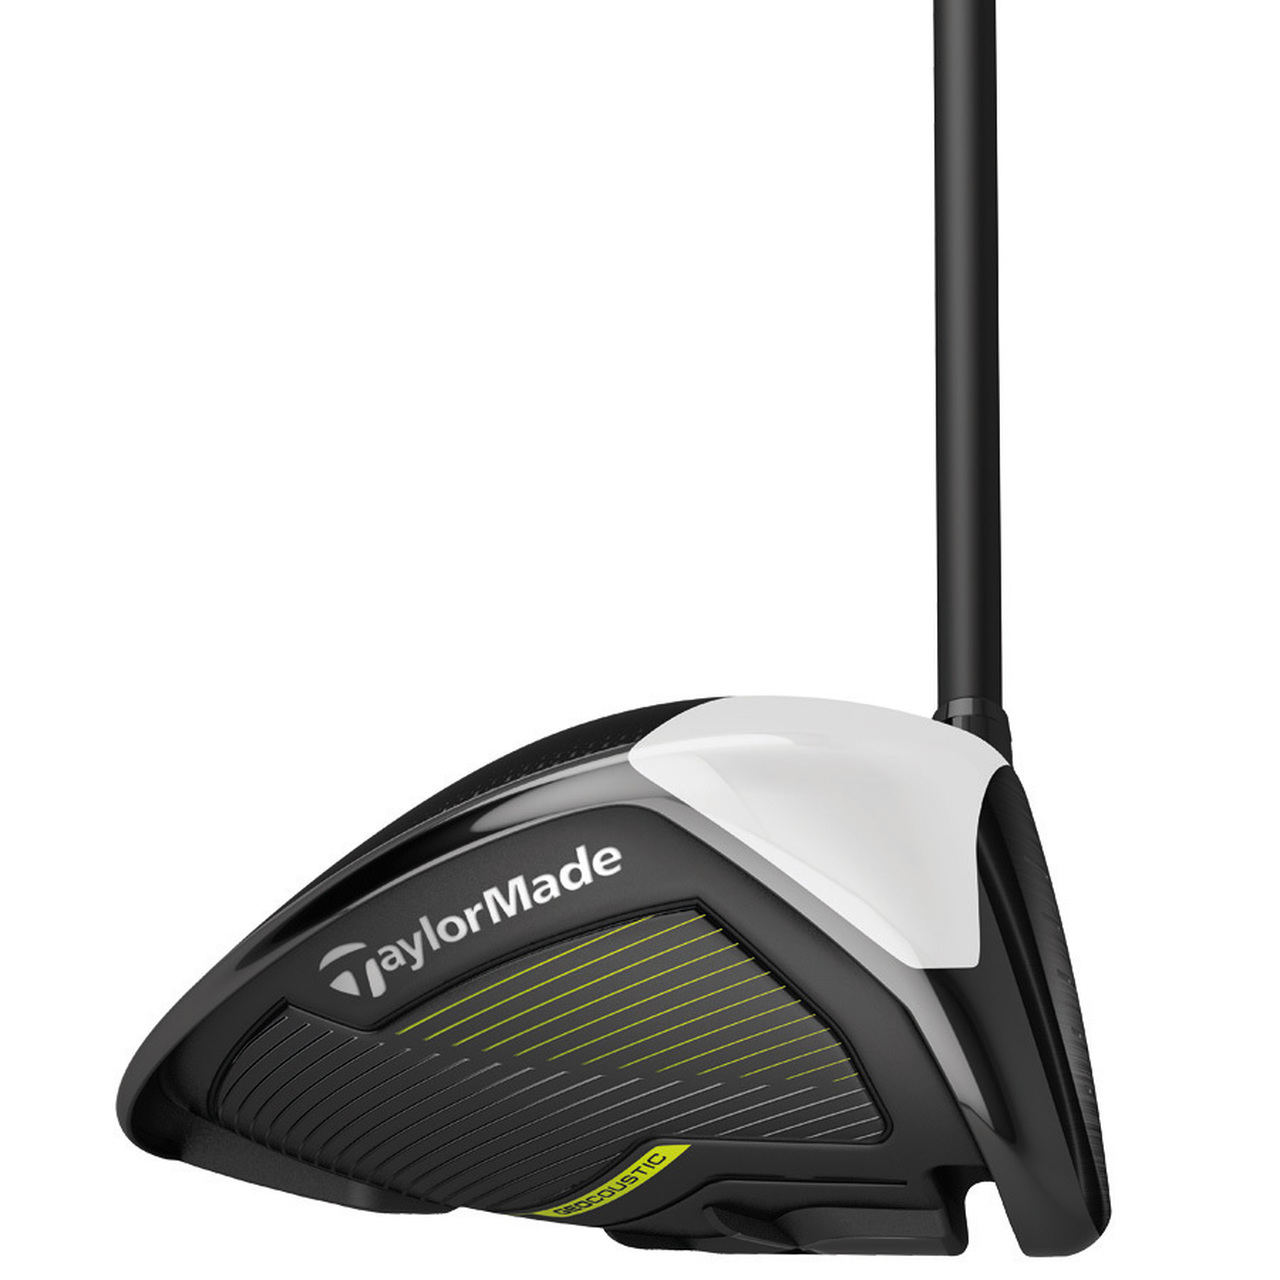 TaylorMade M2 Men's Driver